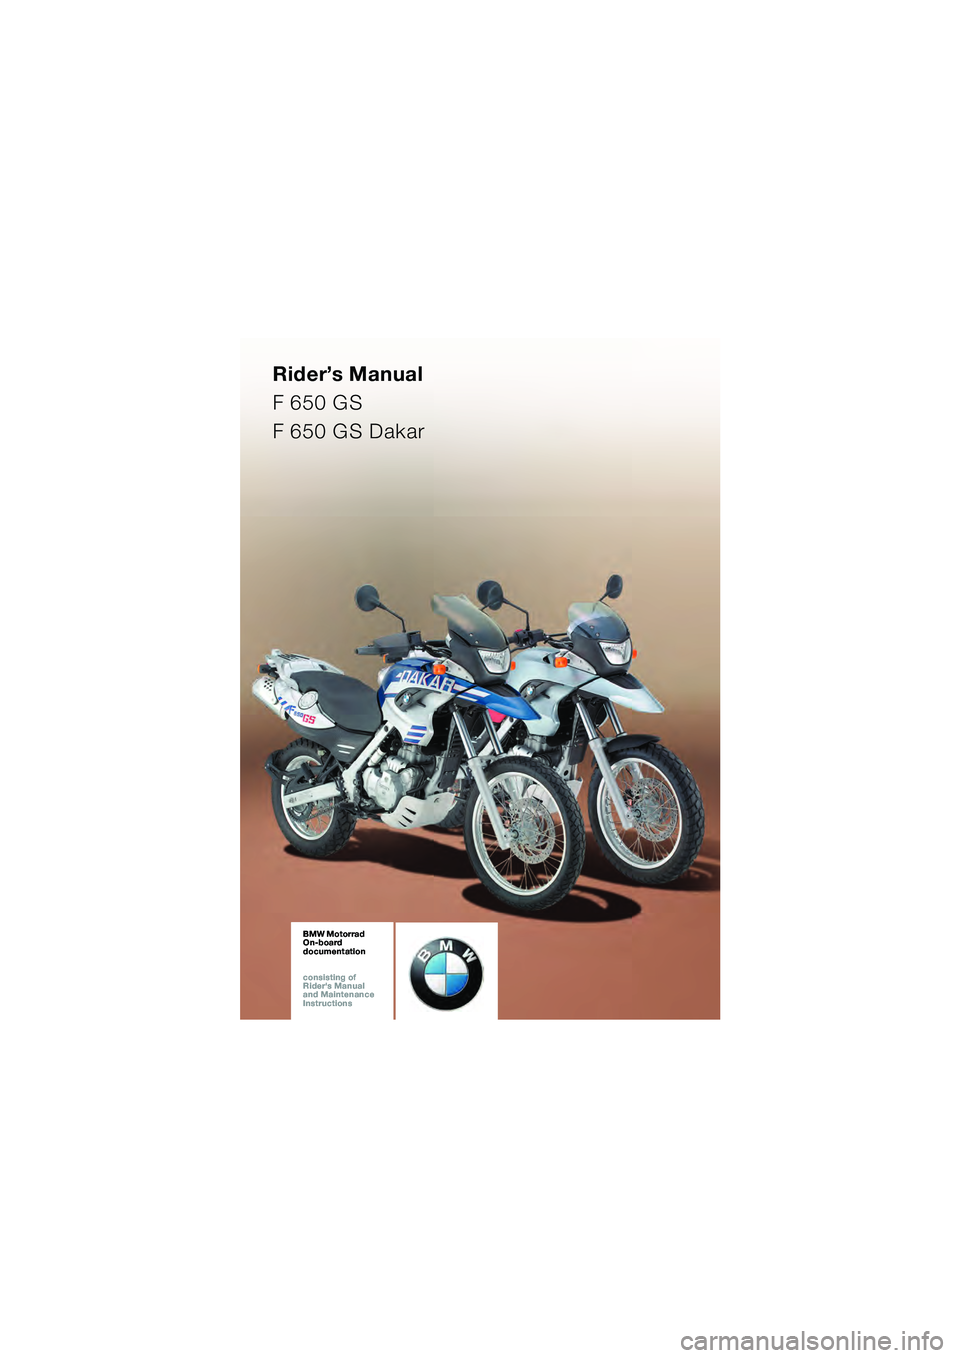 BMW MOTORRAD F 650 GS 2003  Riders Manual (in English) Rider’s Manual
F 650 GS
F 650 GS Dakar
BMW Motorrad
On-board  
documentation
consisting of  
Riders Manual  
and Maintenance  
InstructionsBMW Motorrad
On-board  
documentation
consisting of  
Ride